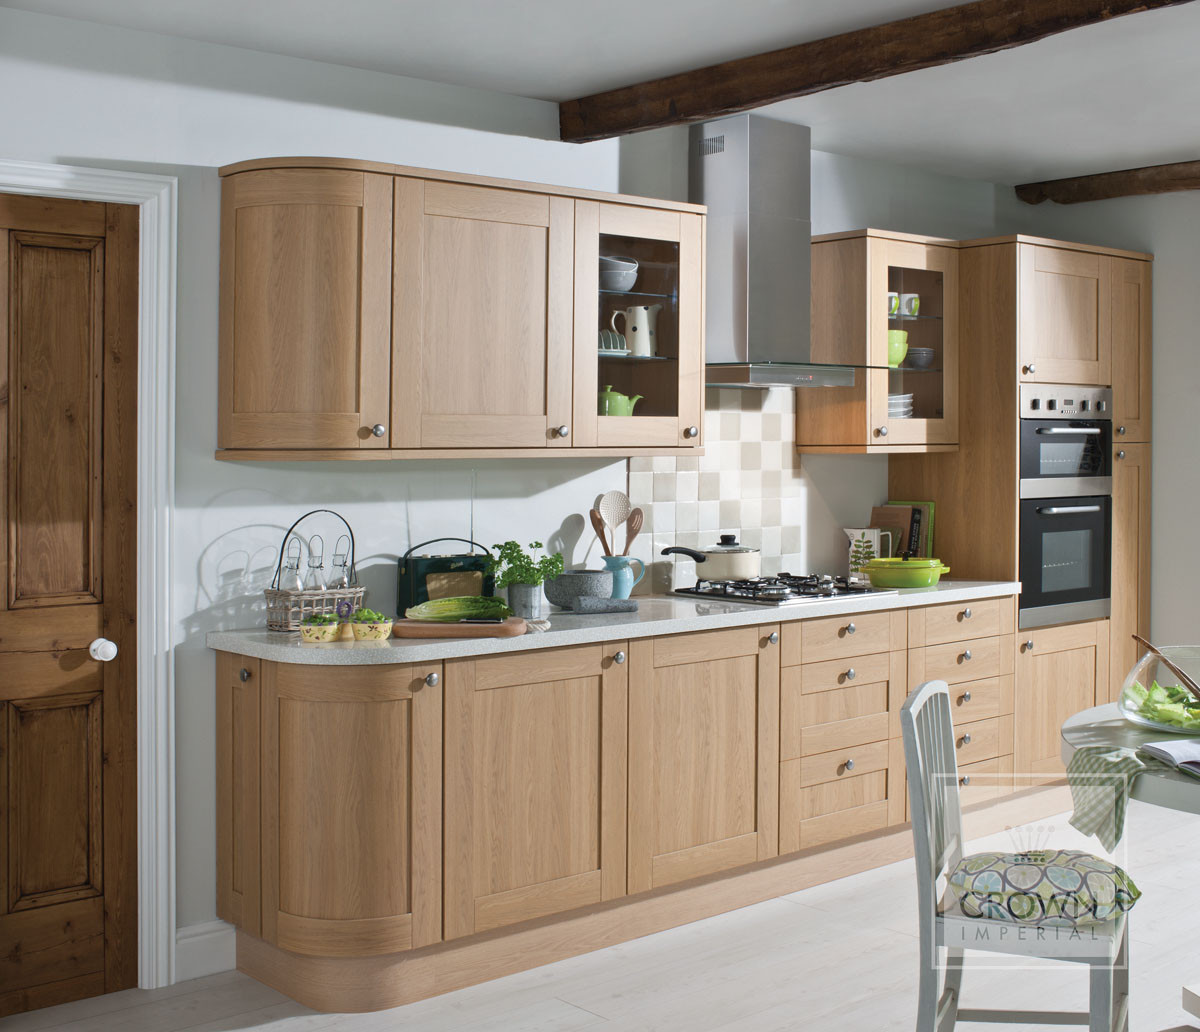 Small Kitchen Inspiration
 Three top tips for small kitchen design